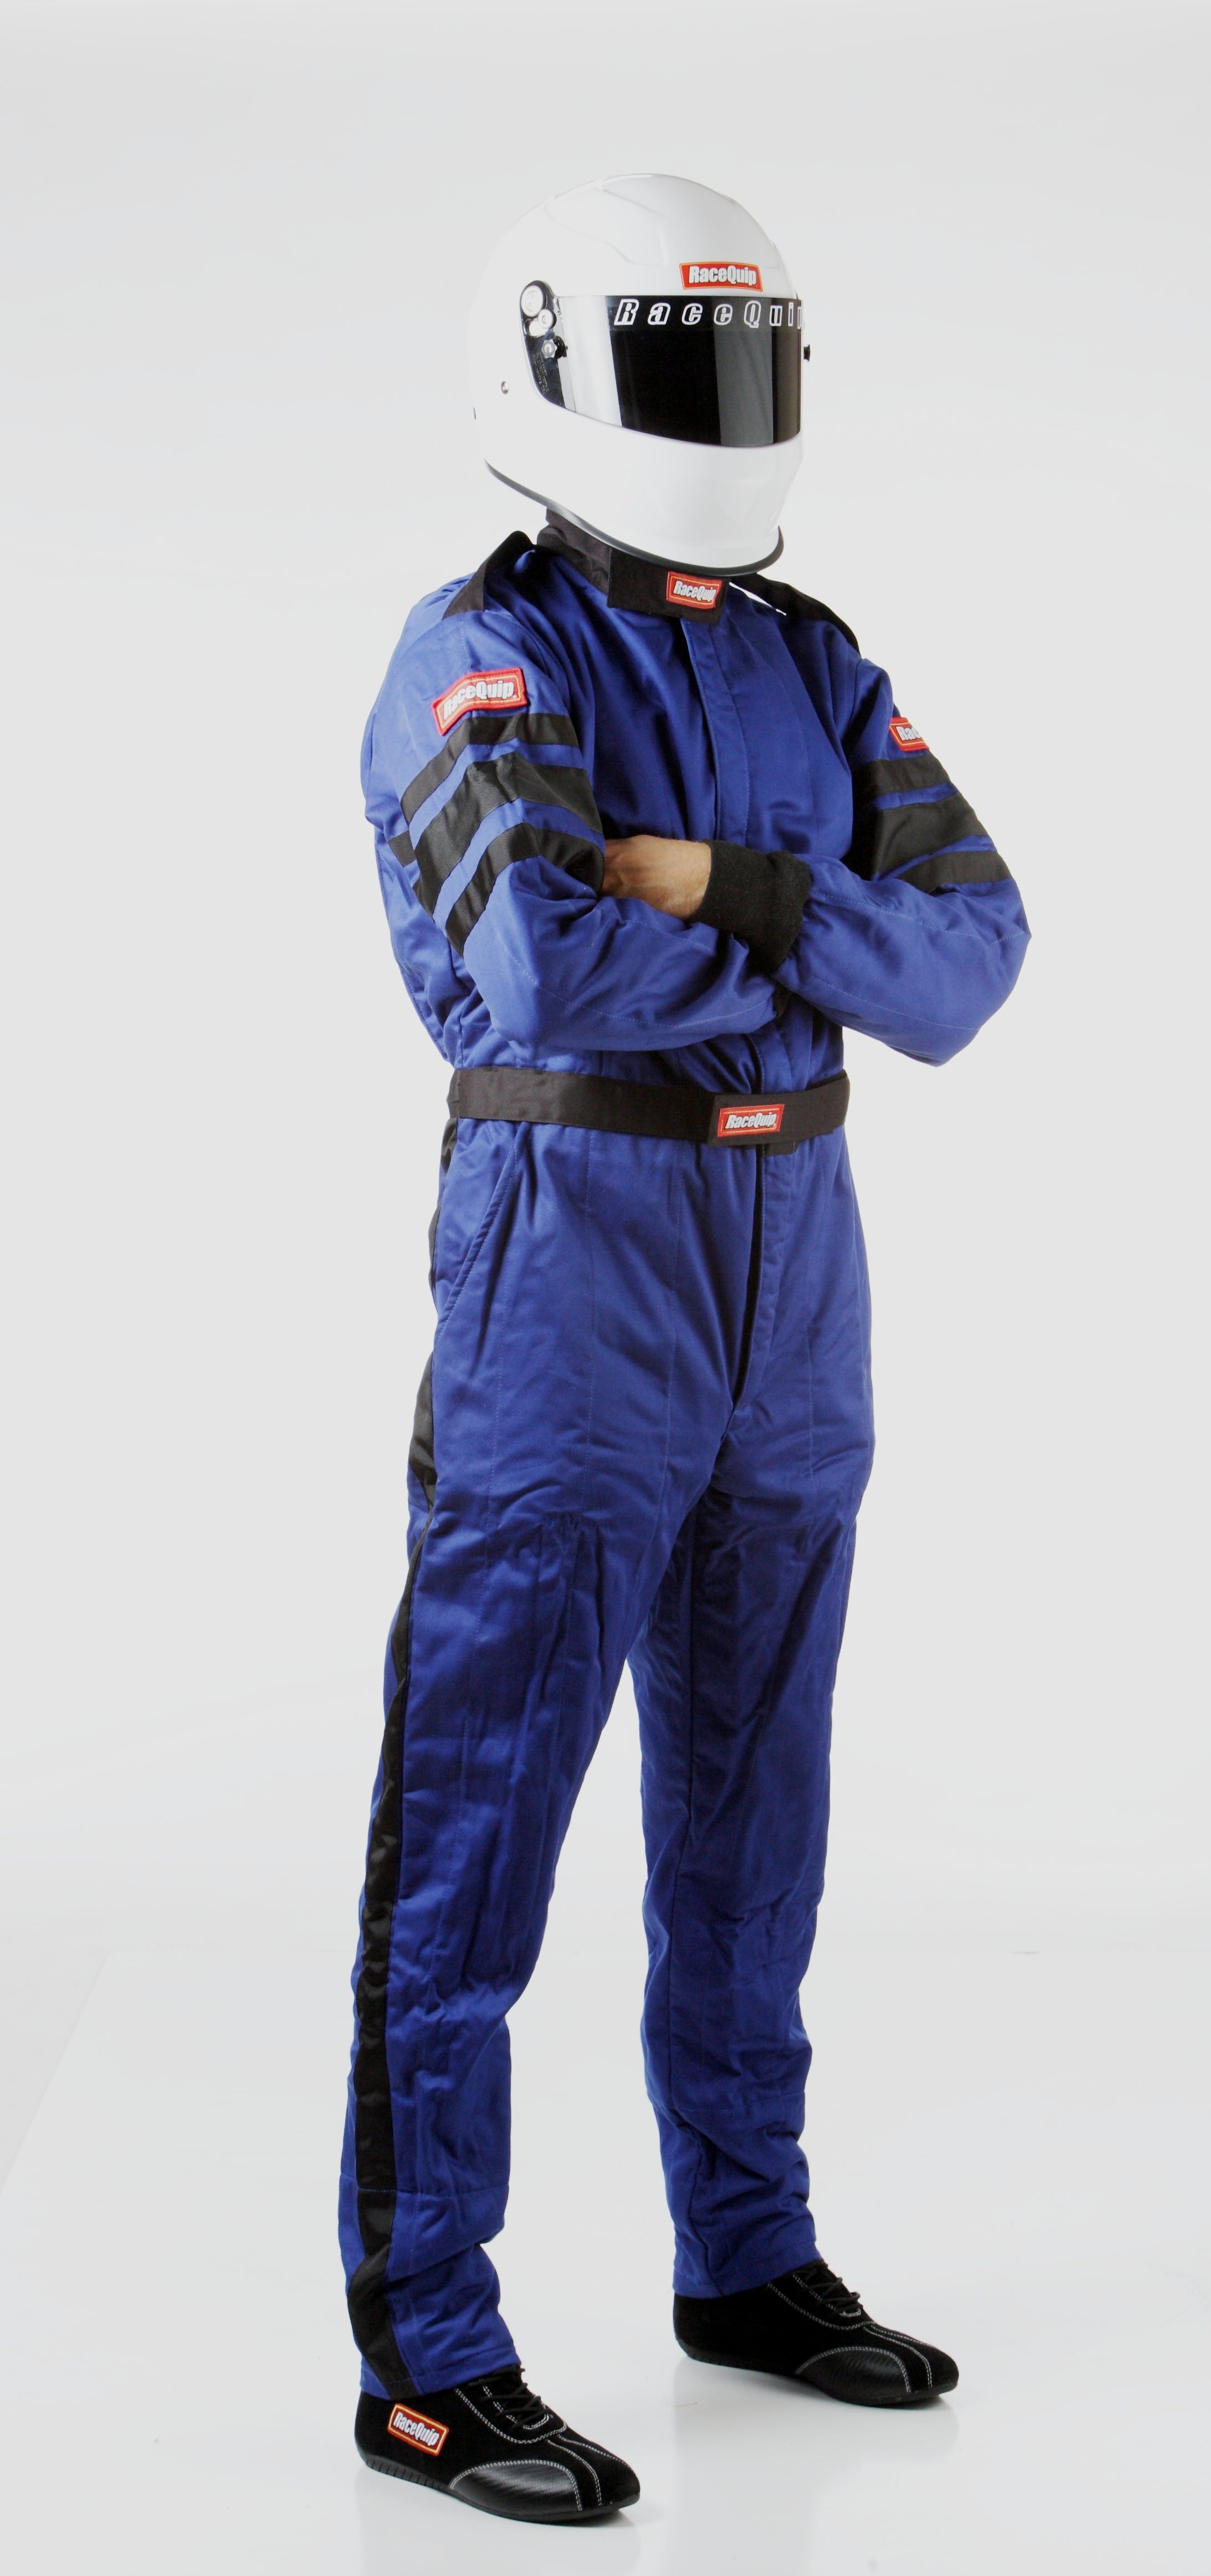 RaceQuip 120022 SFI-5 Pyrovatex One-Piece Multi-Layer Racing Fire Suit (Blue, Small)